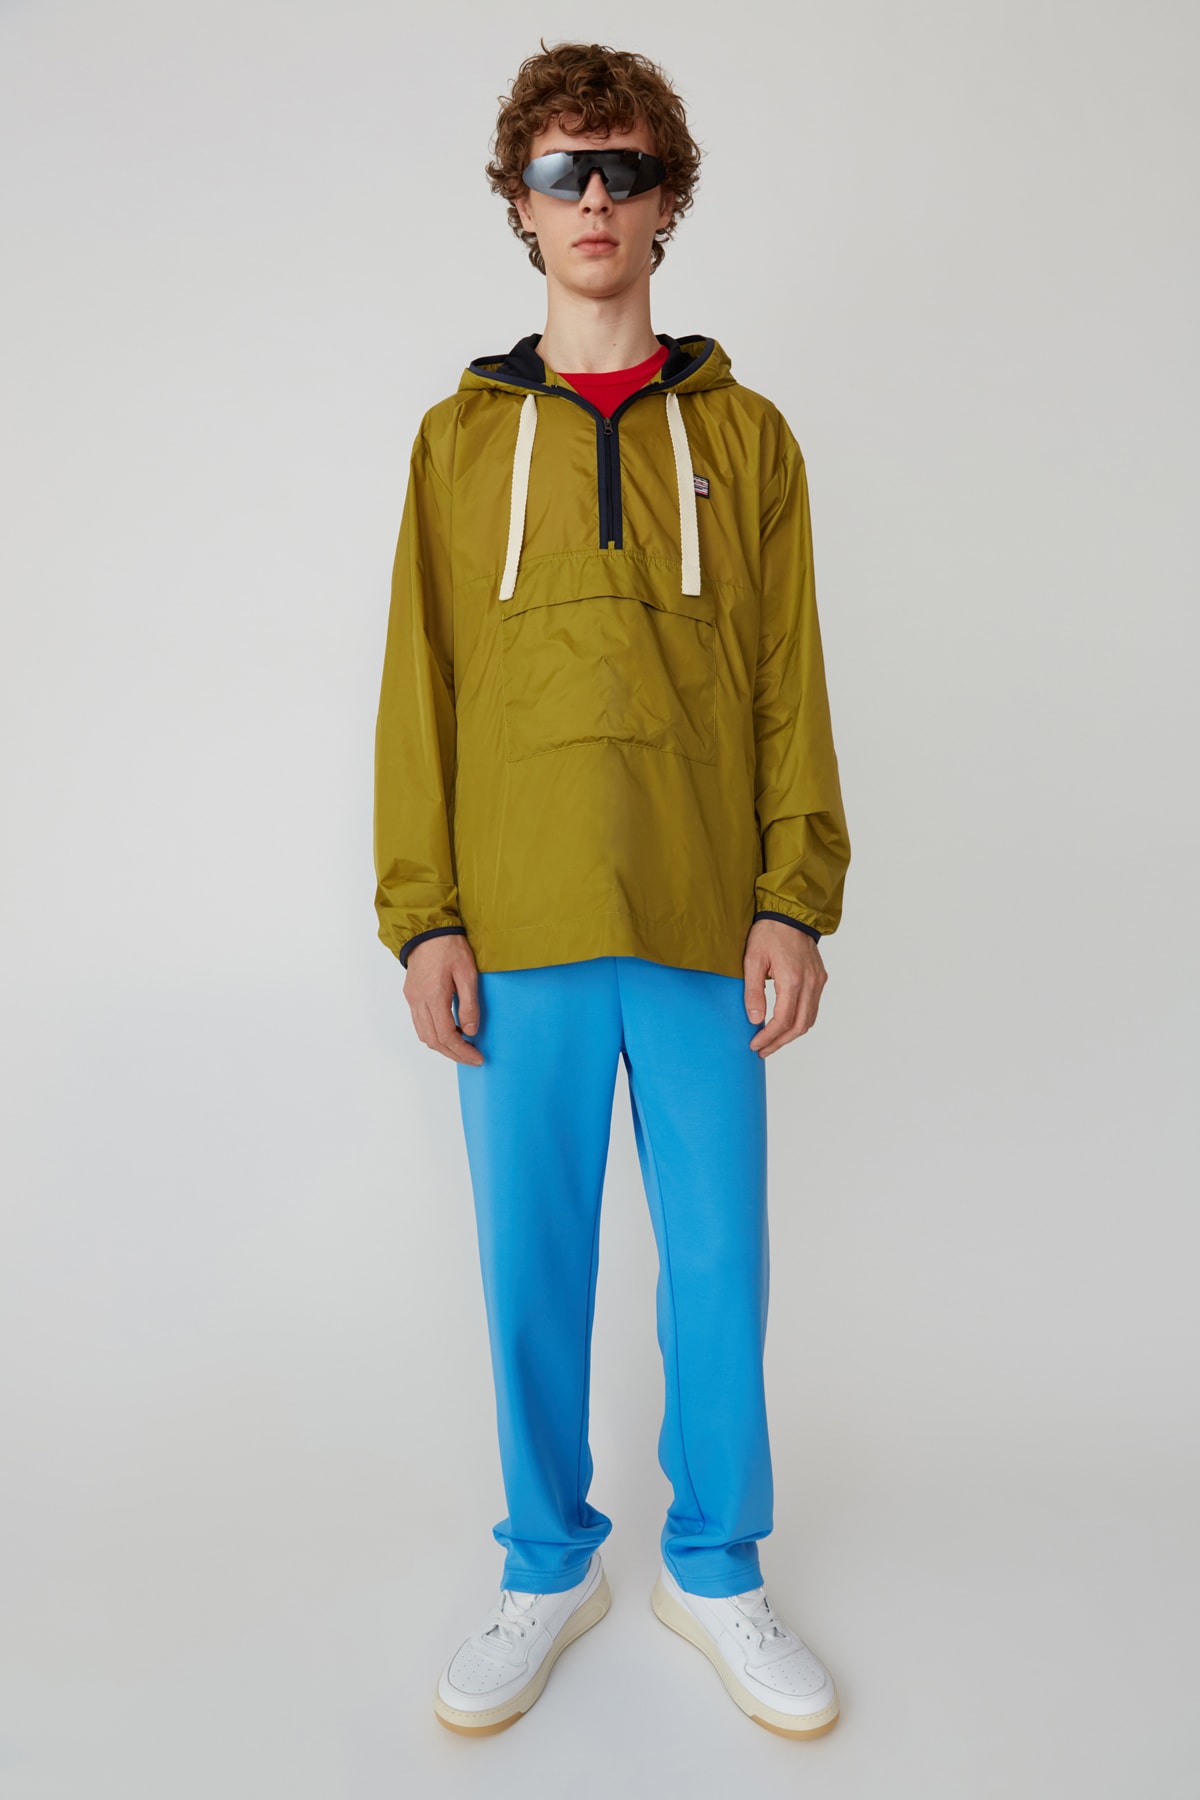 Acne Studios Spring/Summer 2019 Face Collection Hooded Jacket Brown Pants Blue